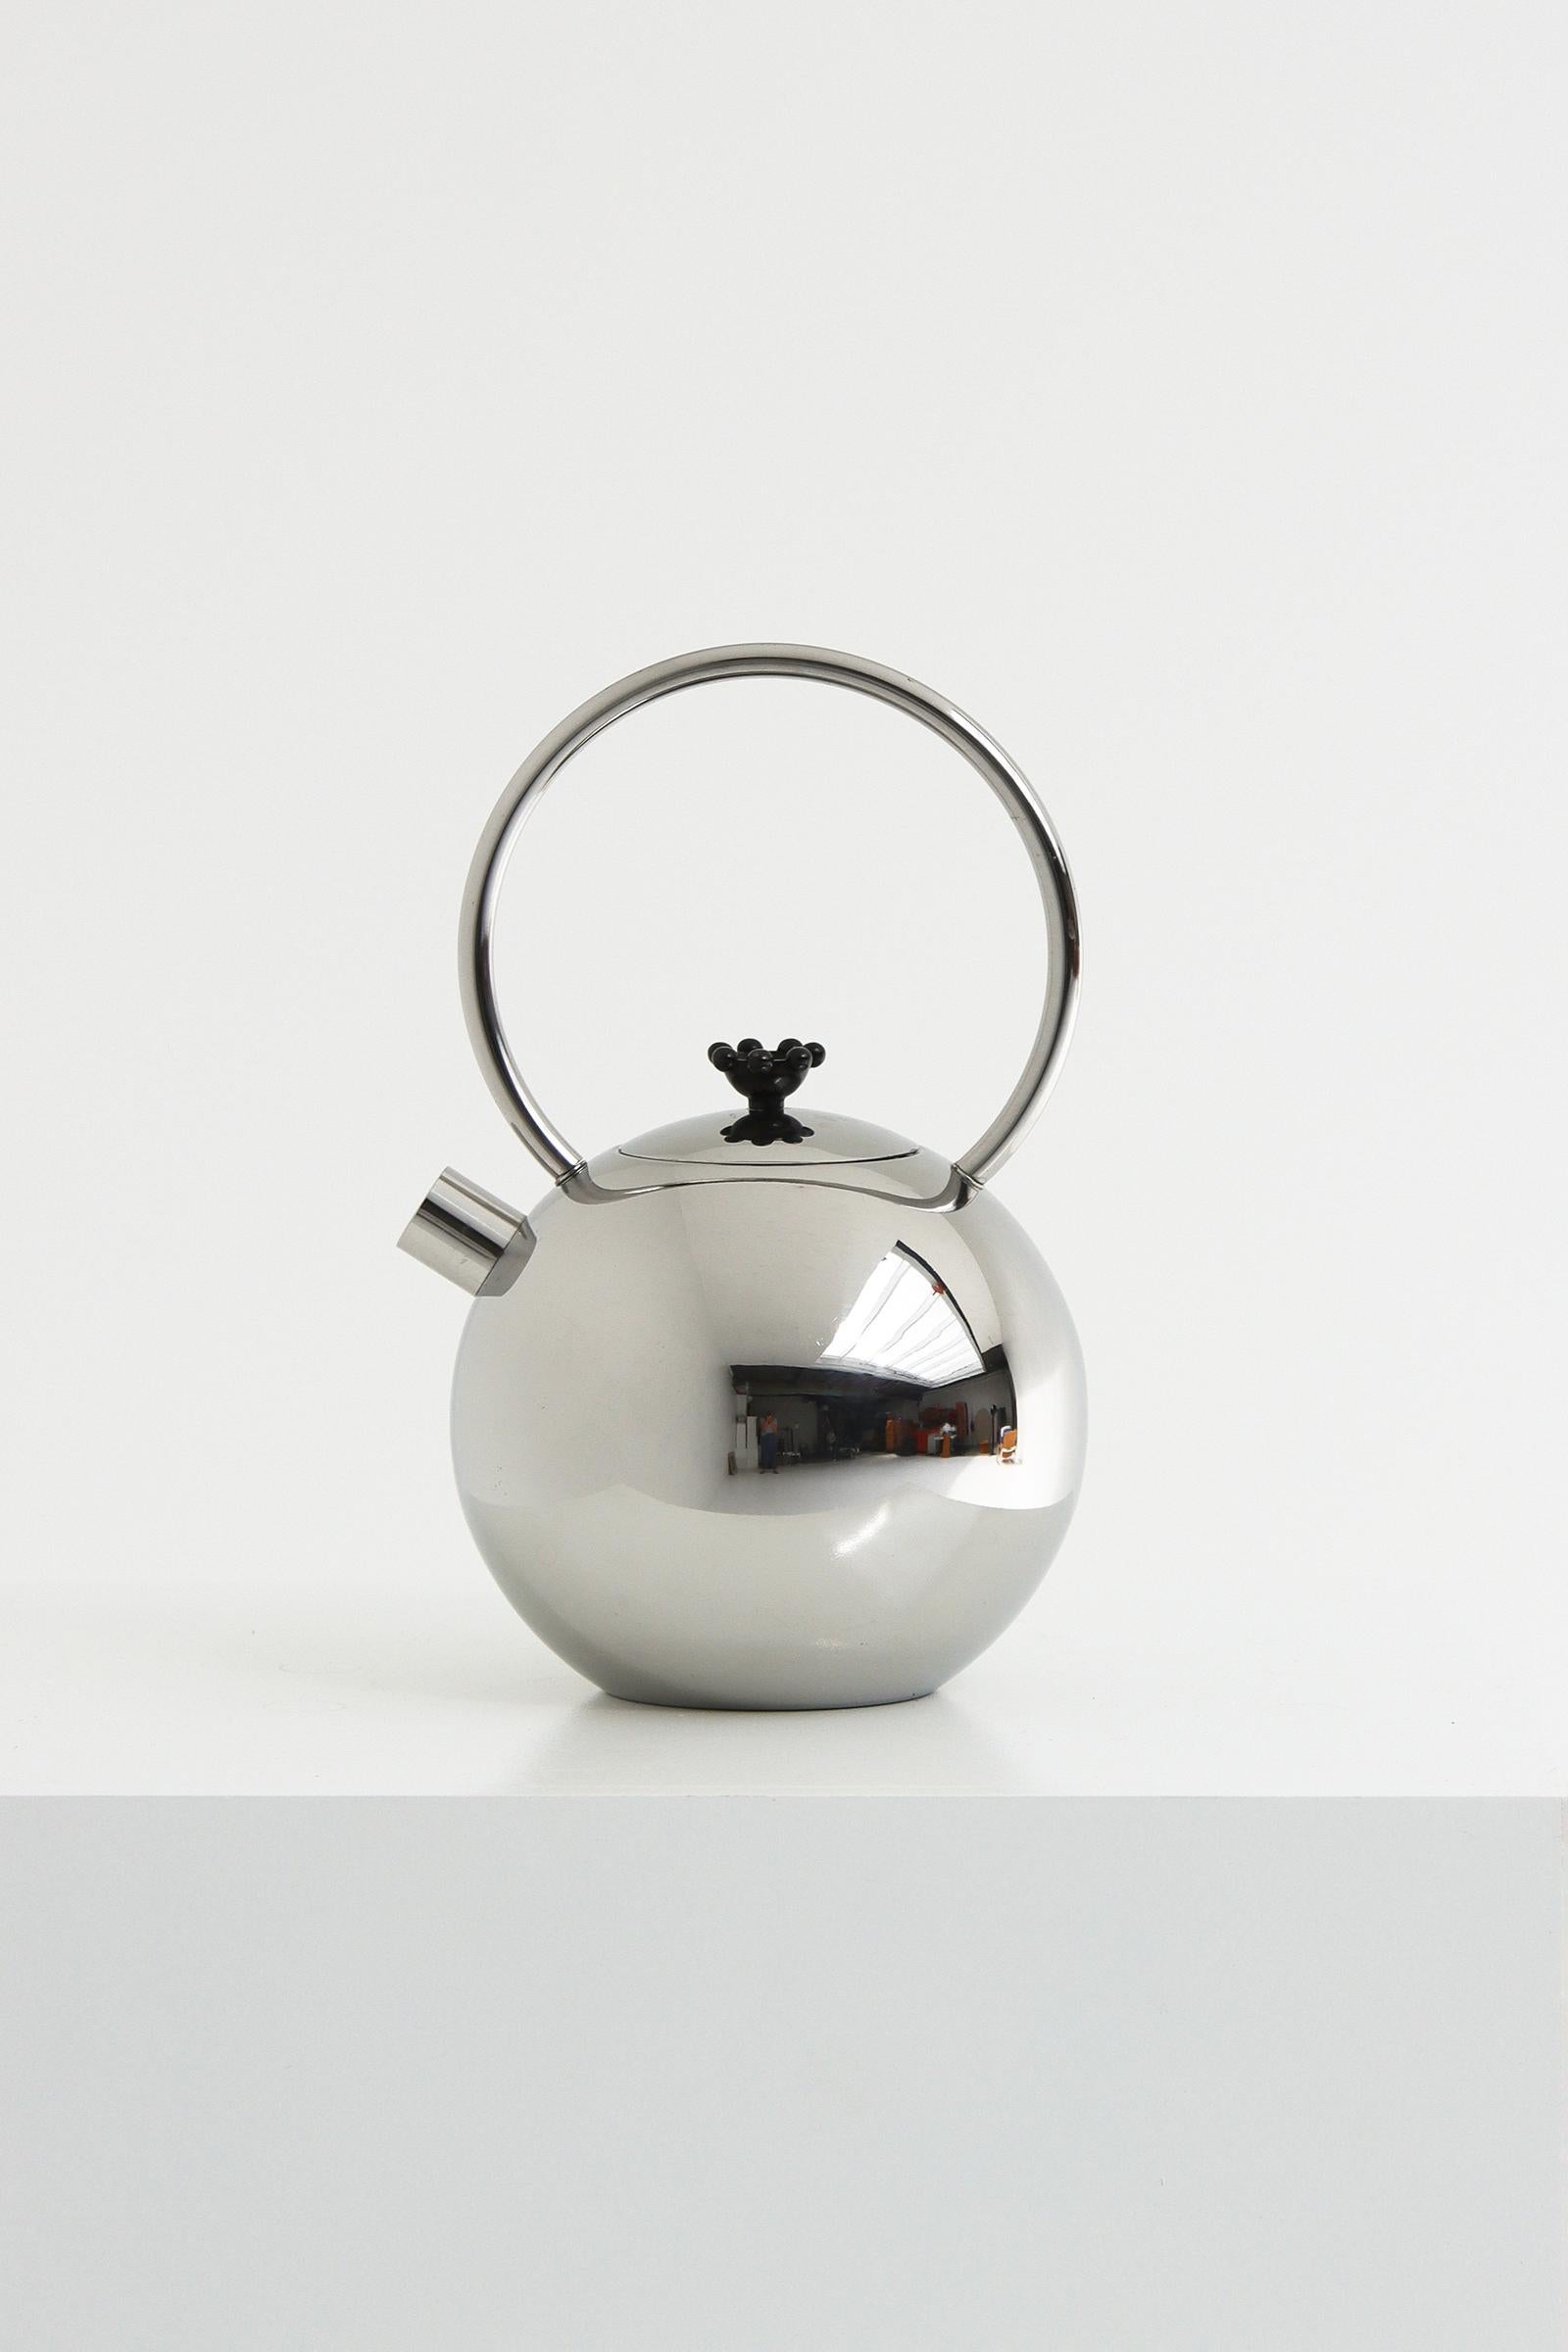 Midcentury modern chrome Teapot from the King Series of Wmf by Matteo Thun 1989 In Good Condition For Sale In Antwerpen, Antwerp